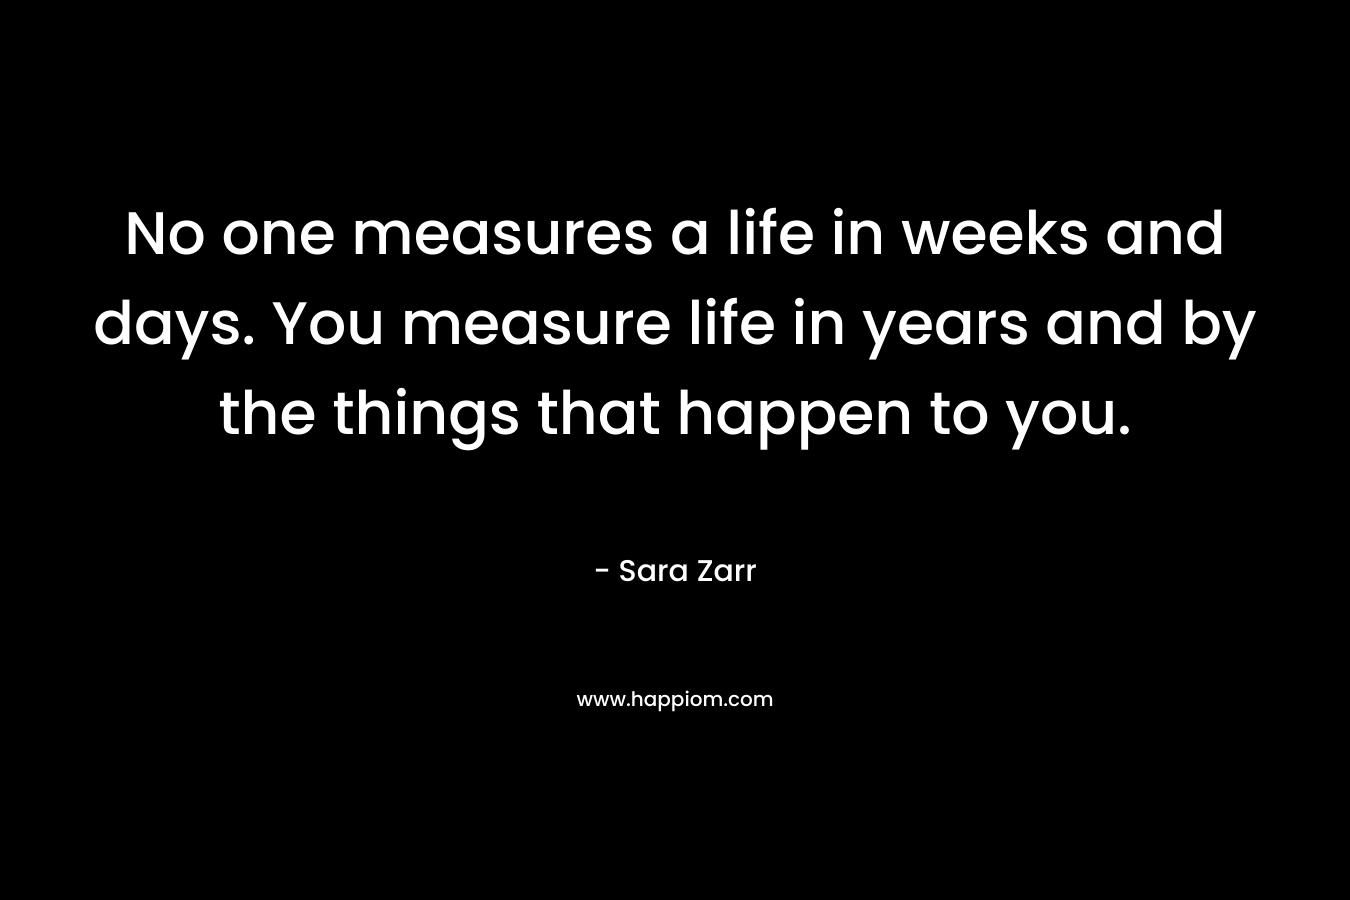 No one measures a life in weeks and days. You measure life in years and by the things that happen to you. – Sara Zarr